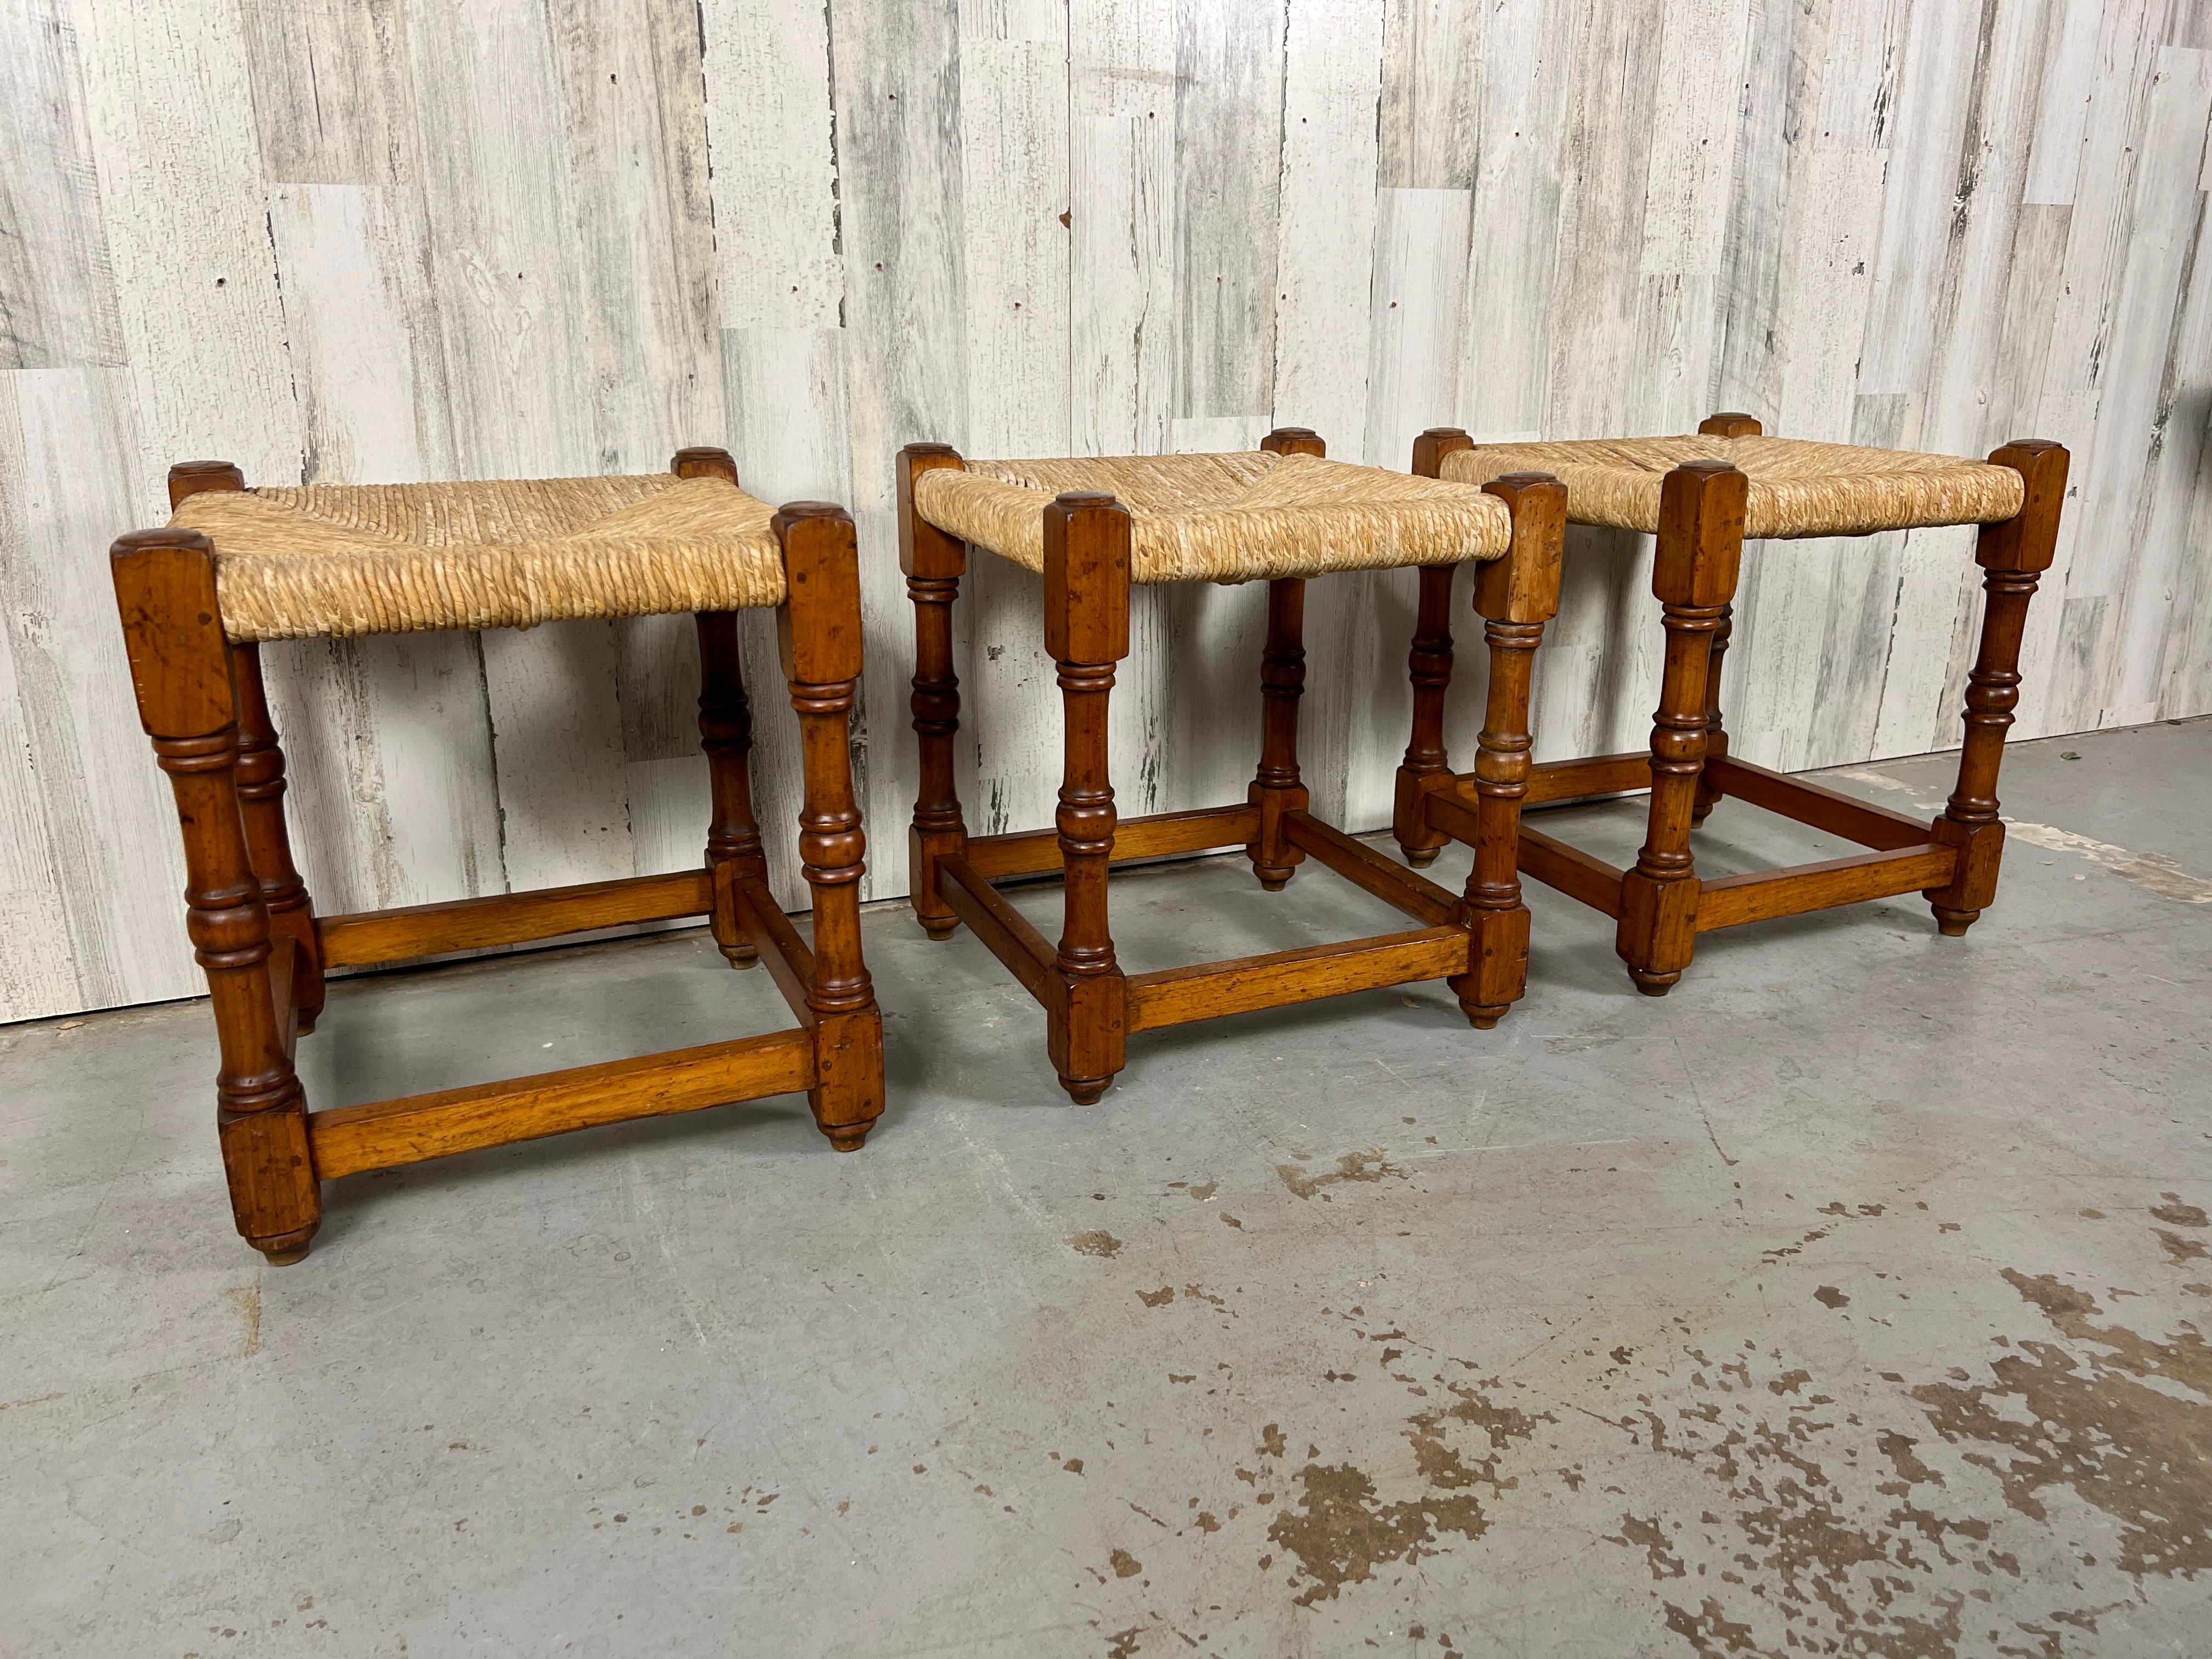 Country Antique Rustic Wild Cherrywood Stools For Sale